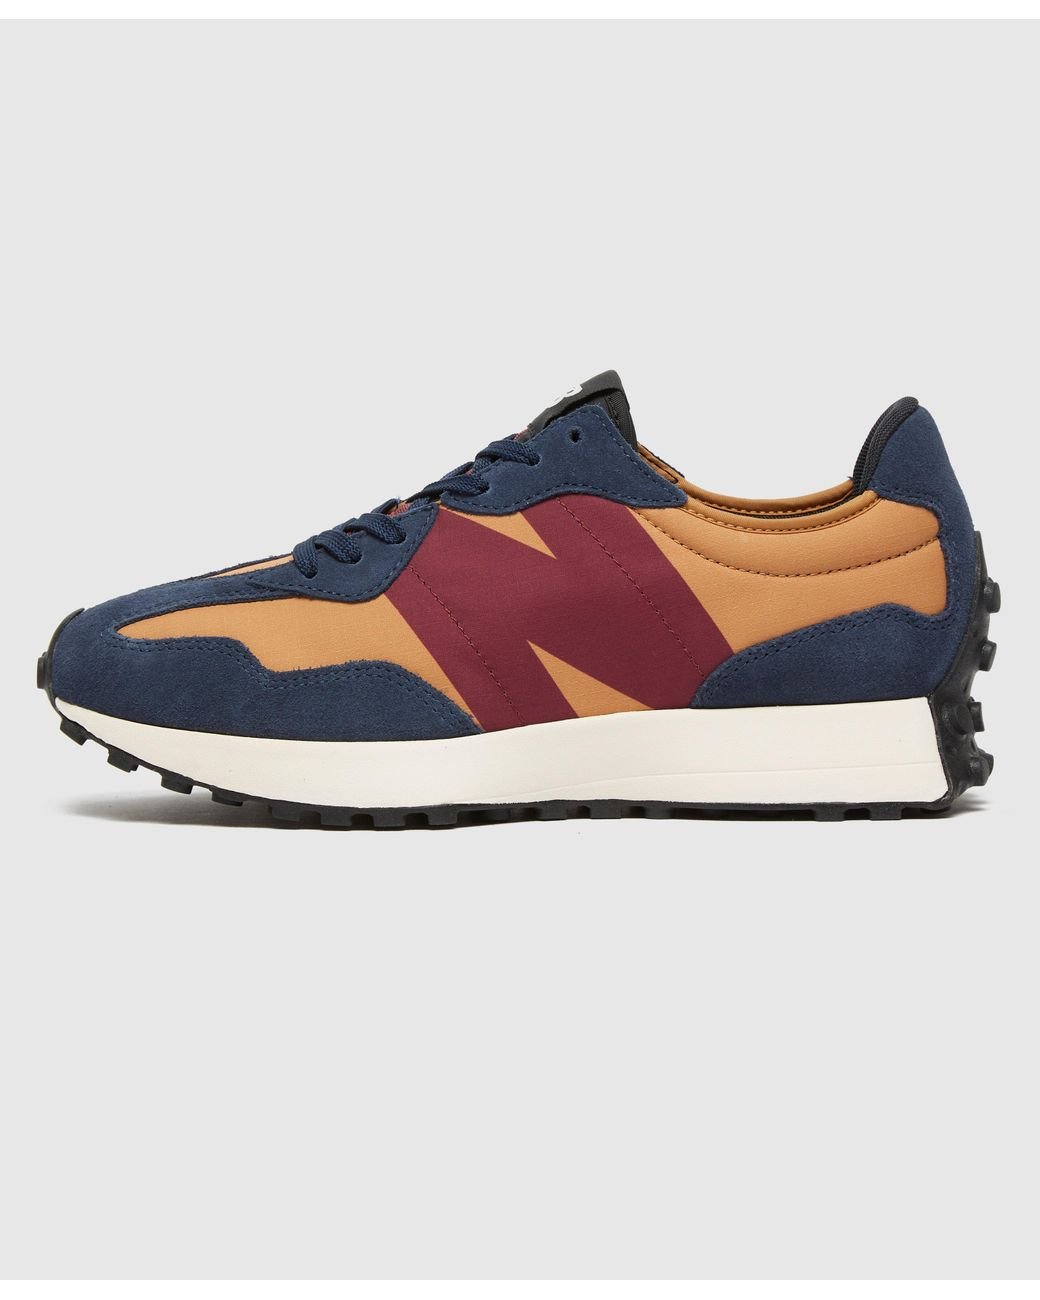 New Balance Leather 327 in Blue for Men - Lyst